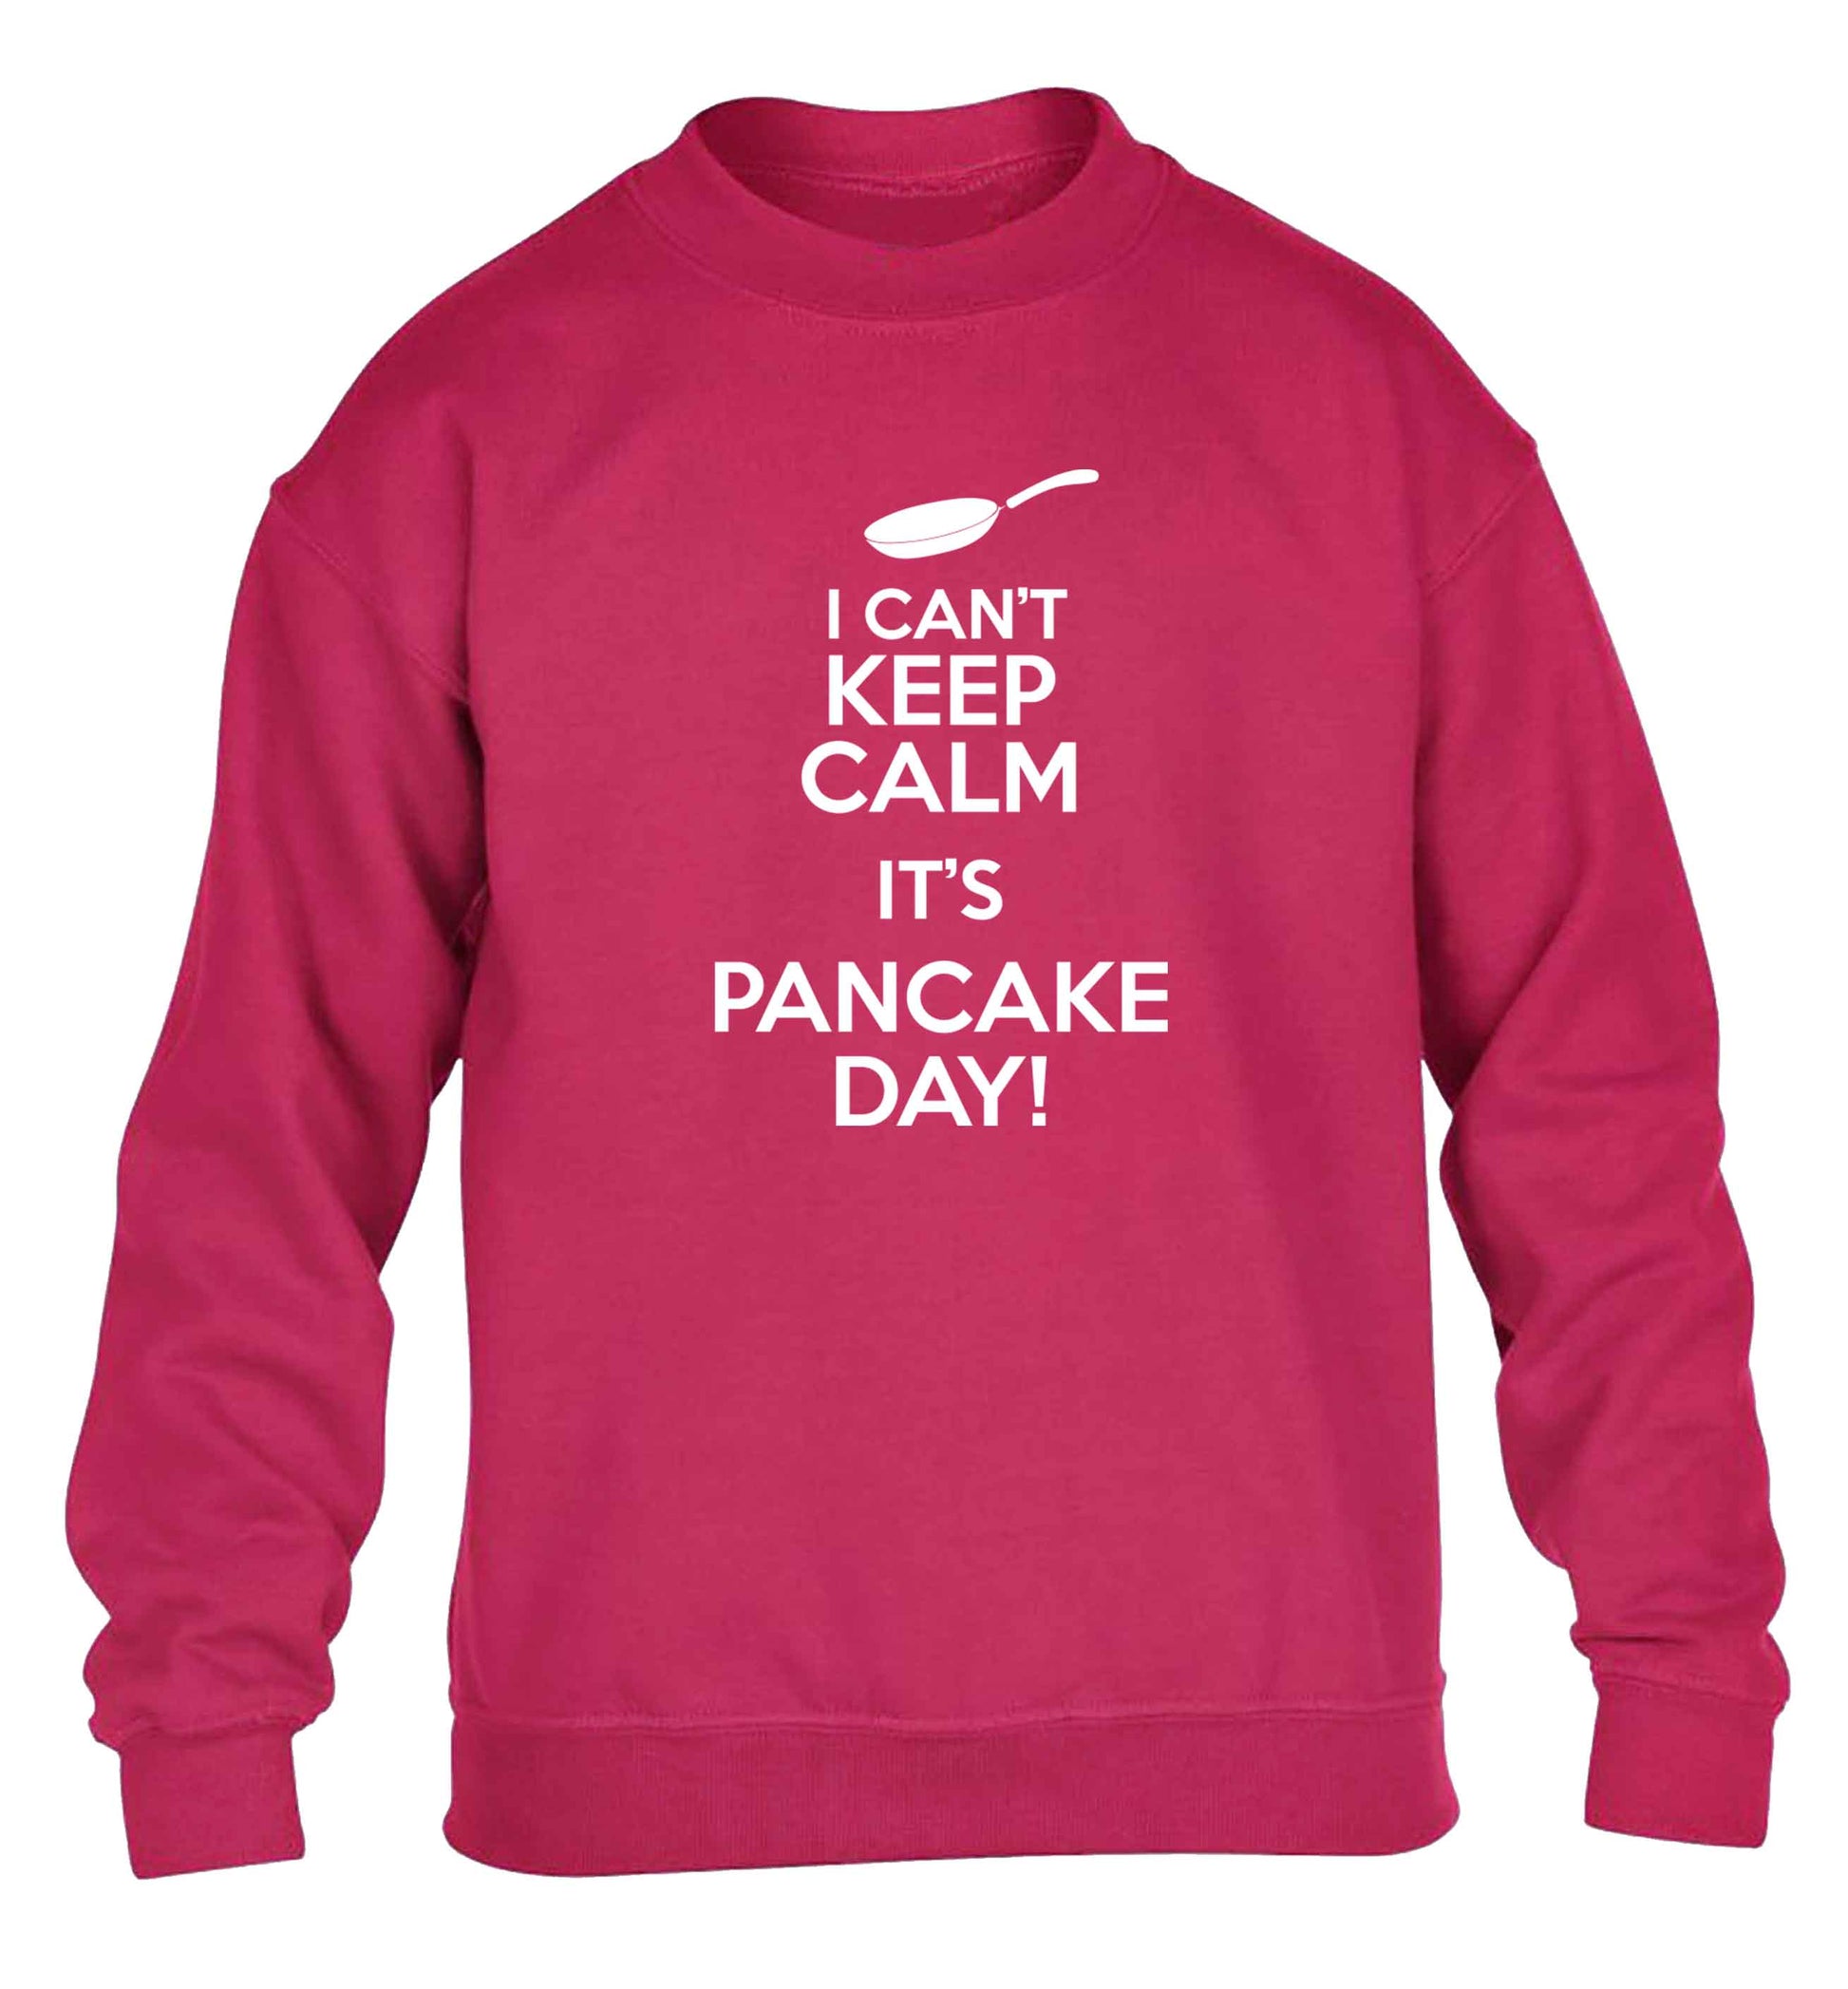 I can't keep calm it's pancake day! children's pink sweater 12-13 Years